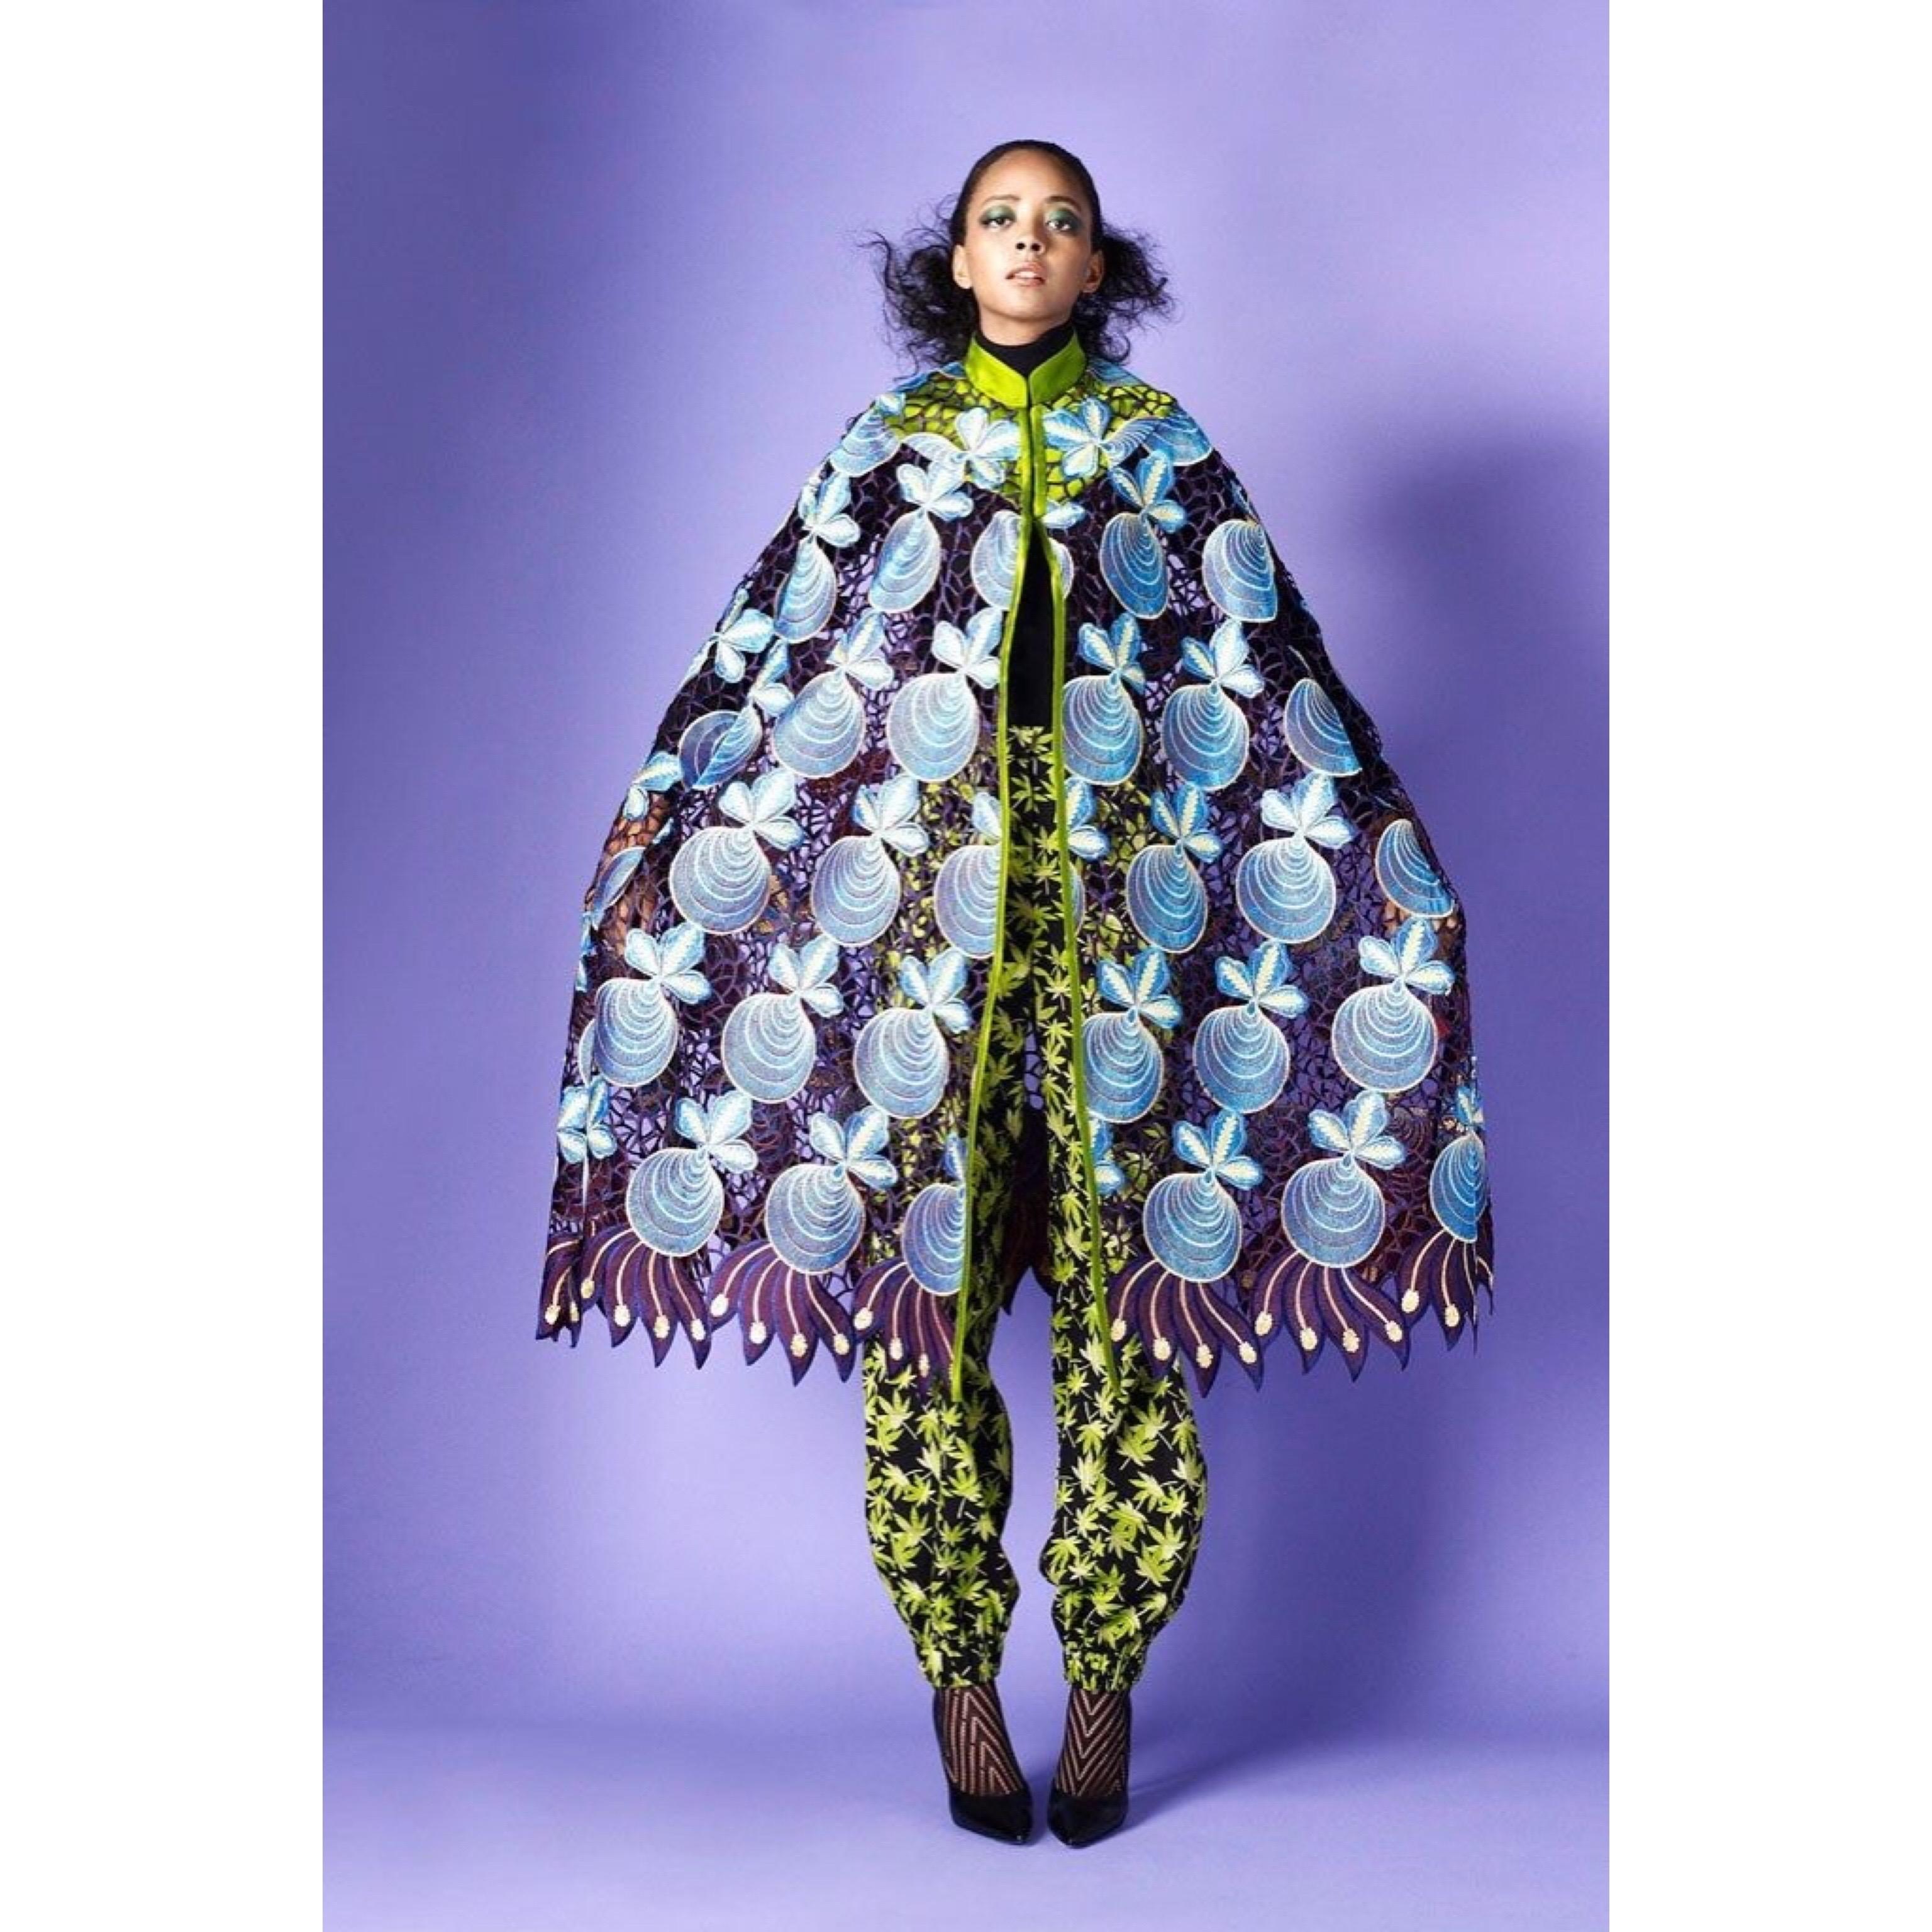 Duro Olowu is a Nigerian designer who made a splash in the fashion scene in 2005. Educated in the UK, Olowu’s designs offer a brilliant cosmopolitan fervor featuring mesmerizing colors and patterns that are uniquely African and mixing them with